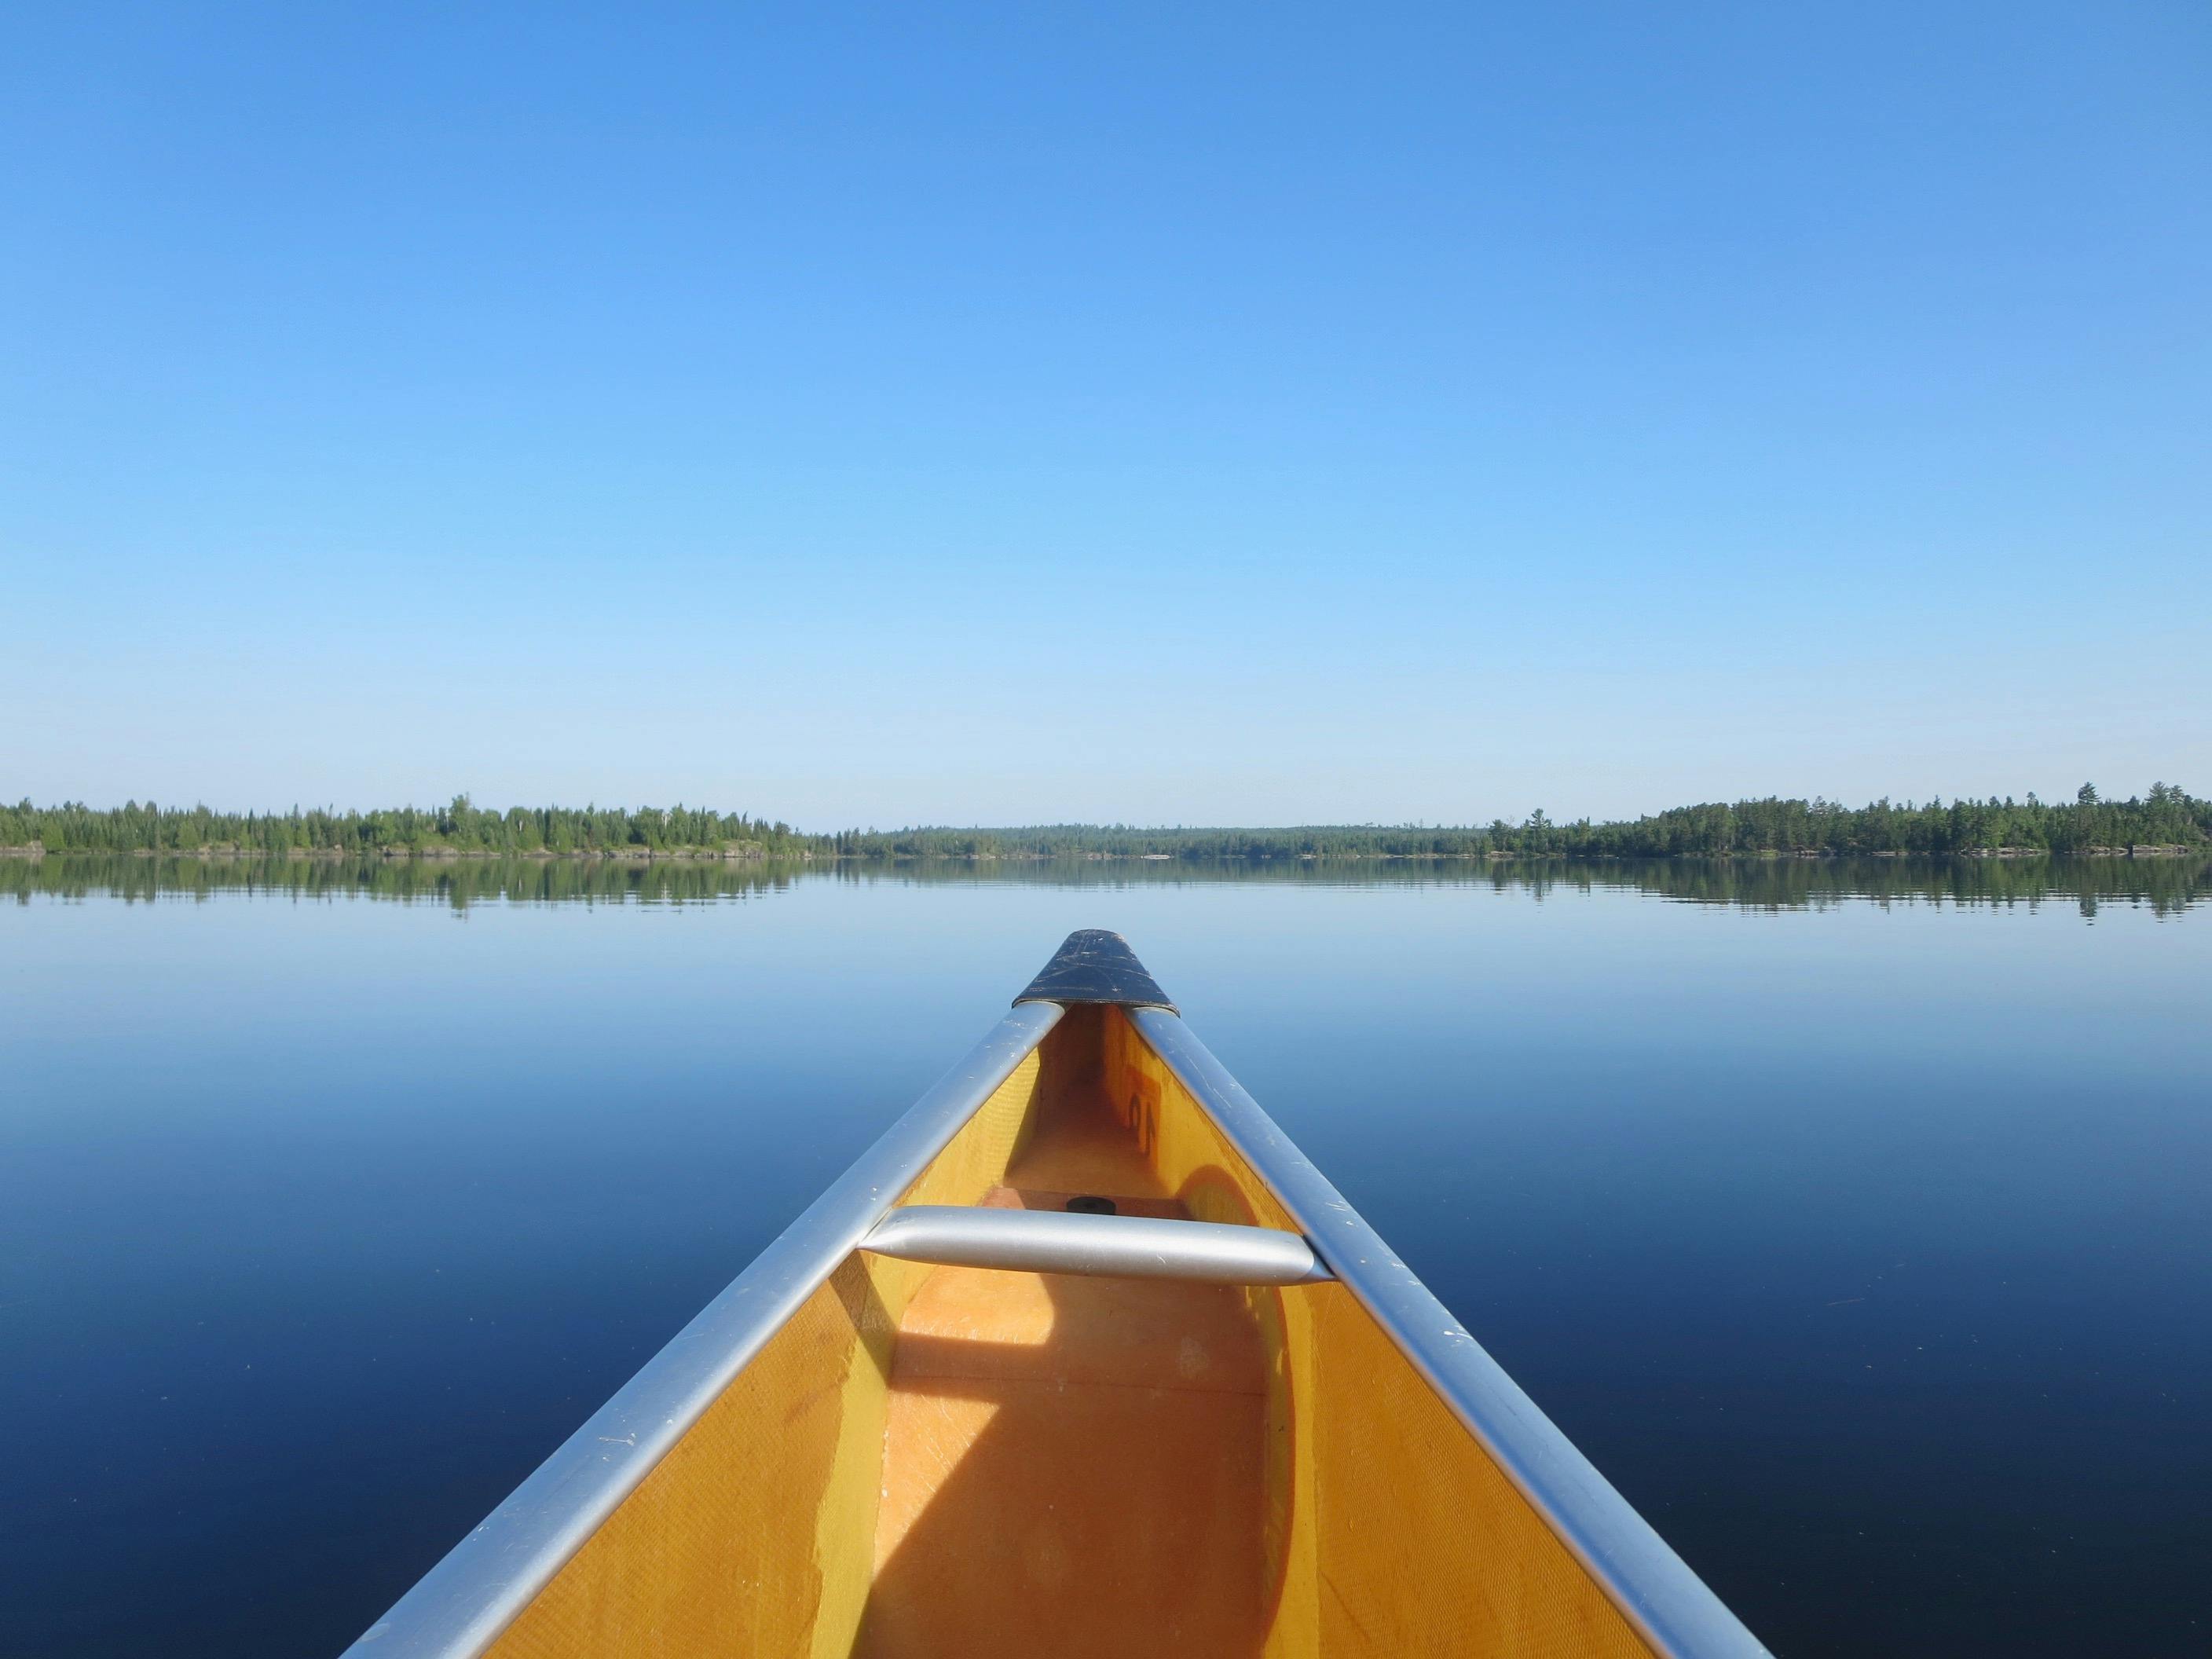 An image of the tip of a yellow canoe on extremely blue, flat, still water with low-lying green foliage on the banks in the distance. 